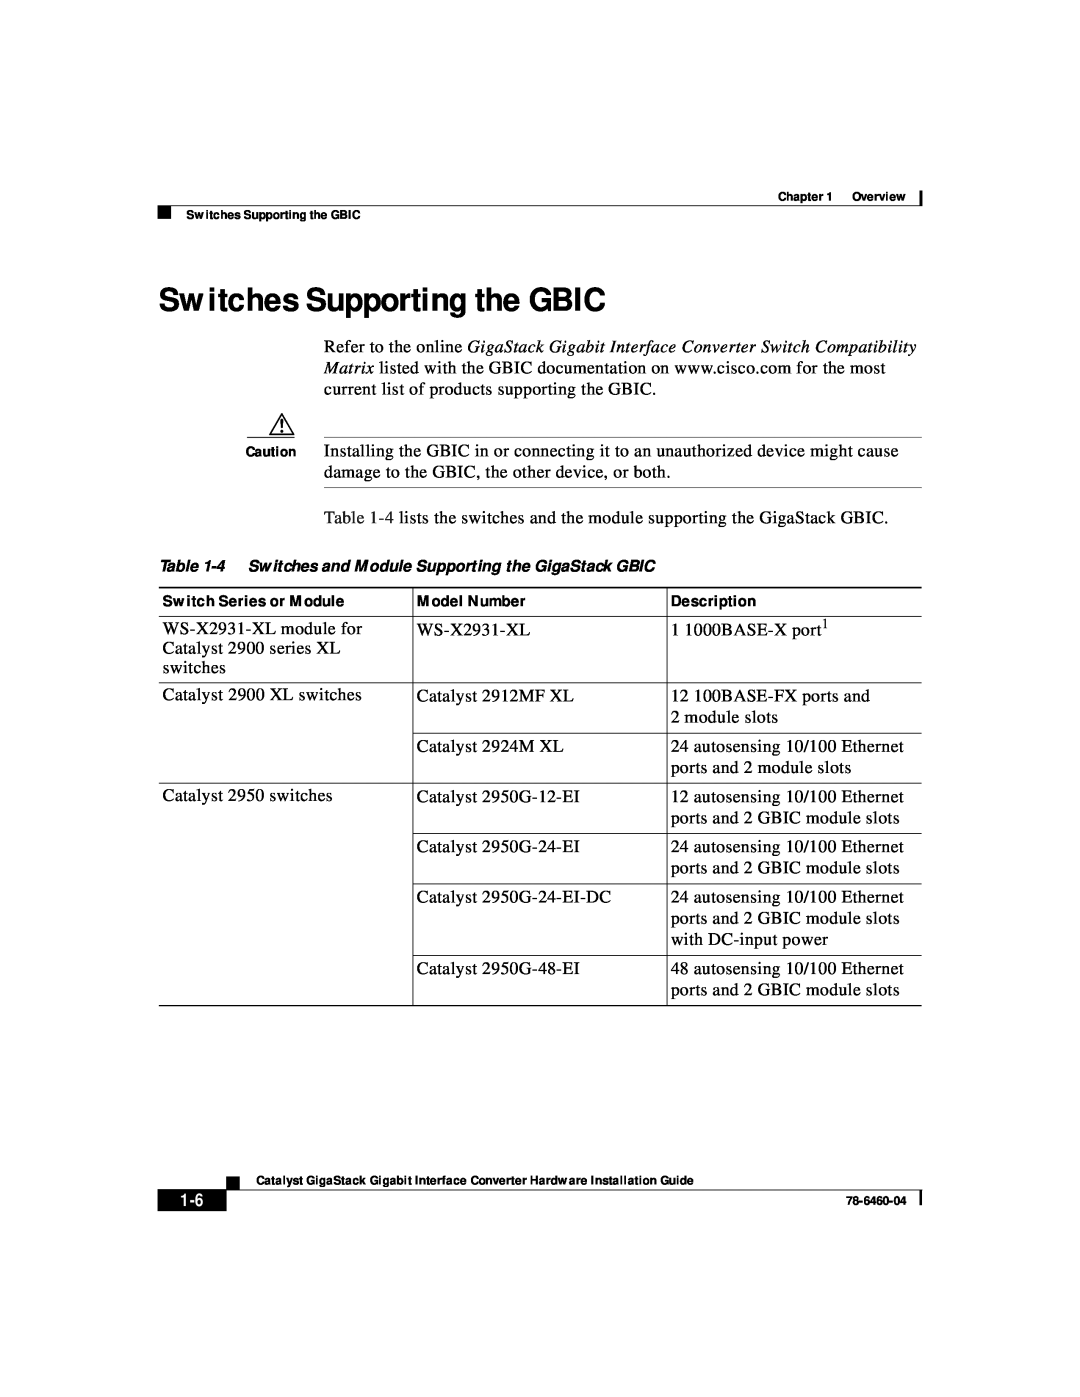 Cisco Systems WS-X3500-XL manual Switches Supporting the GBIC, Switch Series or Module, Model Number, Description 